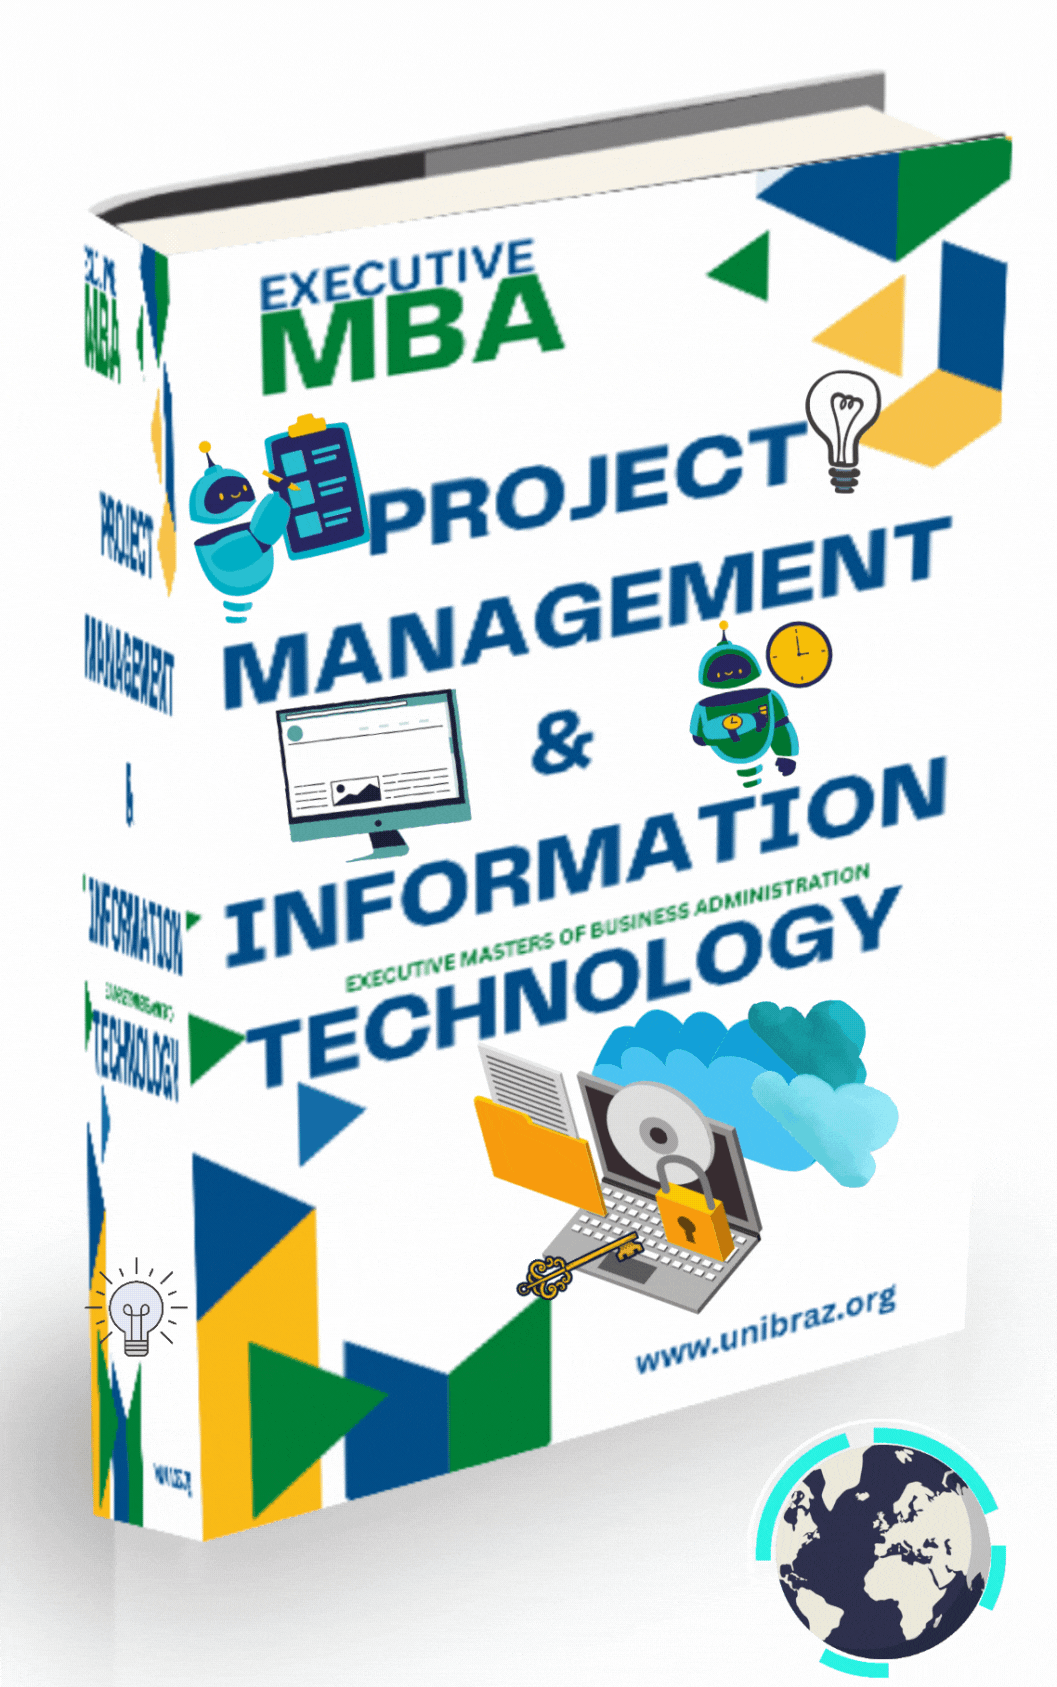 EXECUTIVE MASTERS OF BUSINESS ADMINISTRATION (EXECUTIVE MBA) PROJECT MANAGEMENT AND INFORMATION TECHNOLOGY